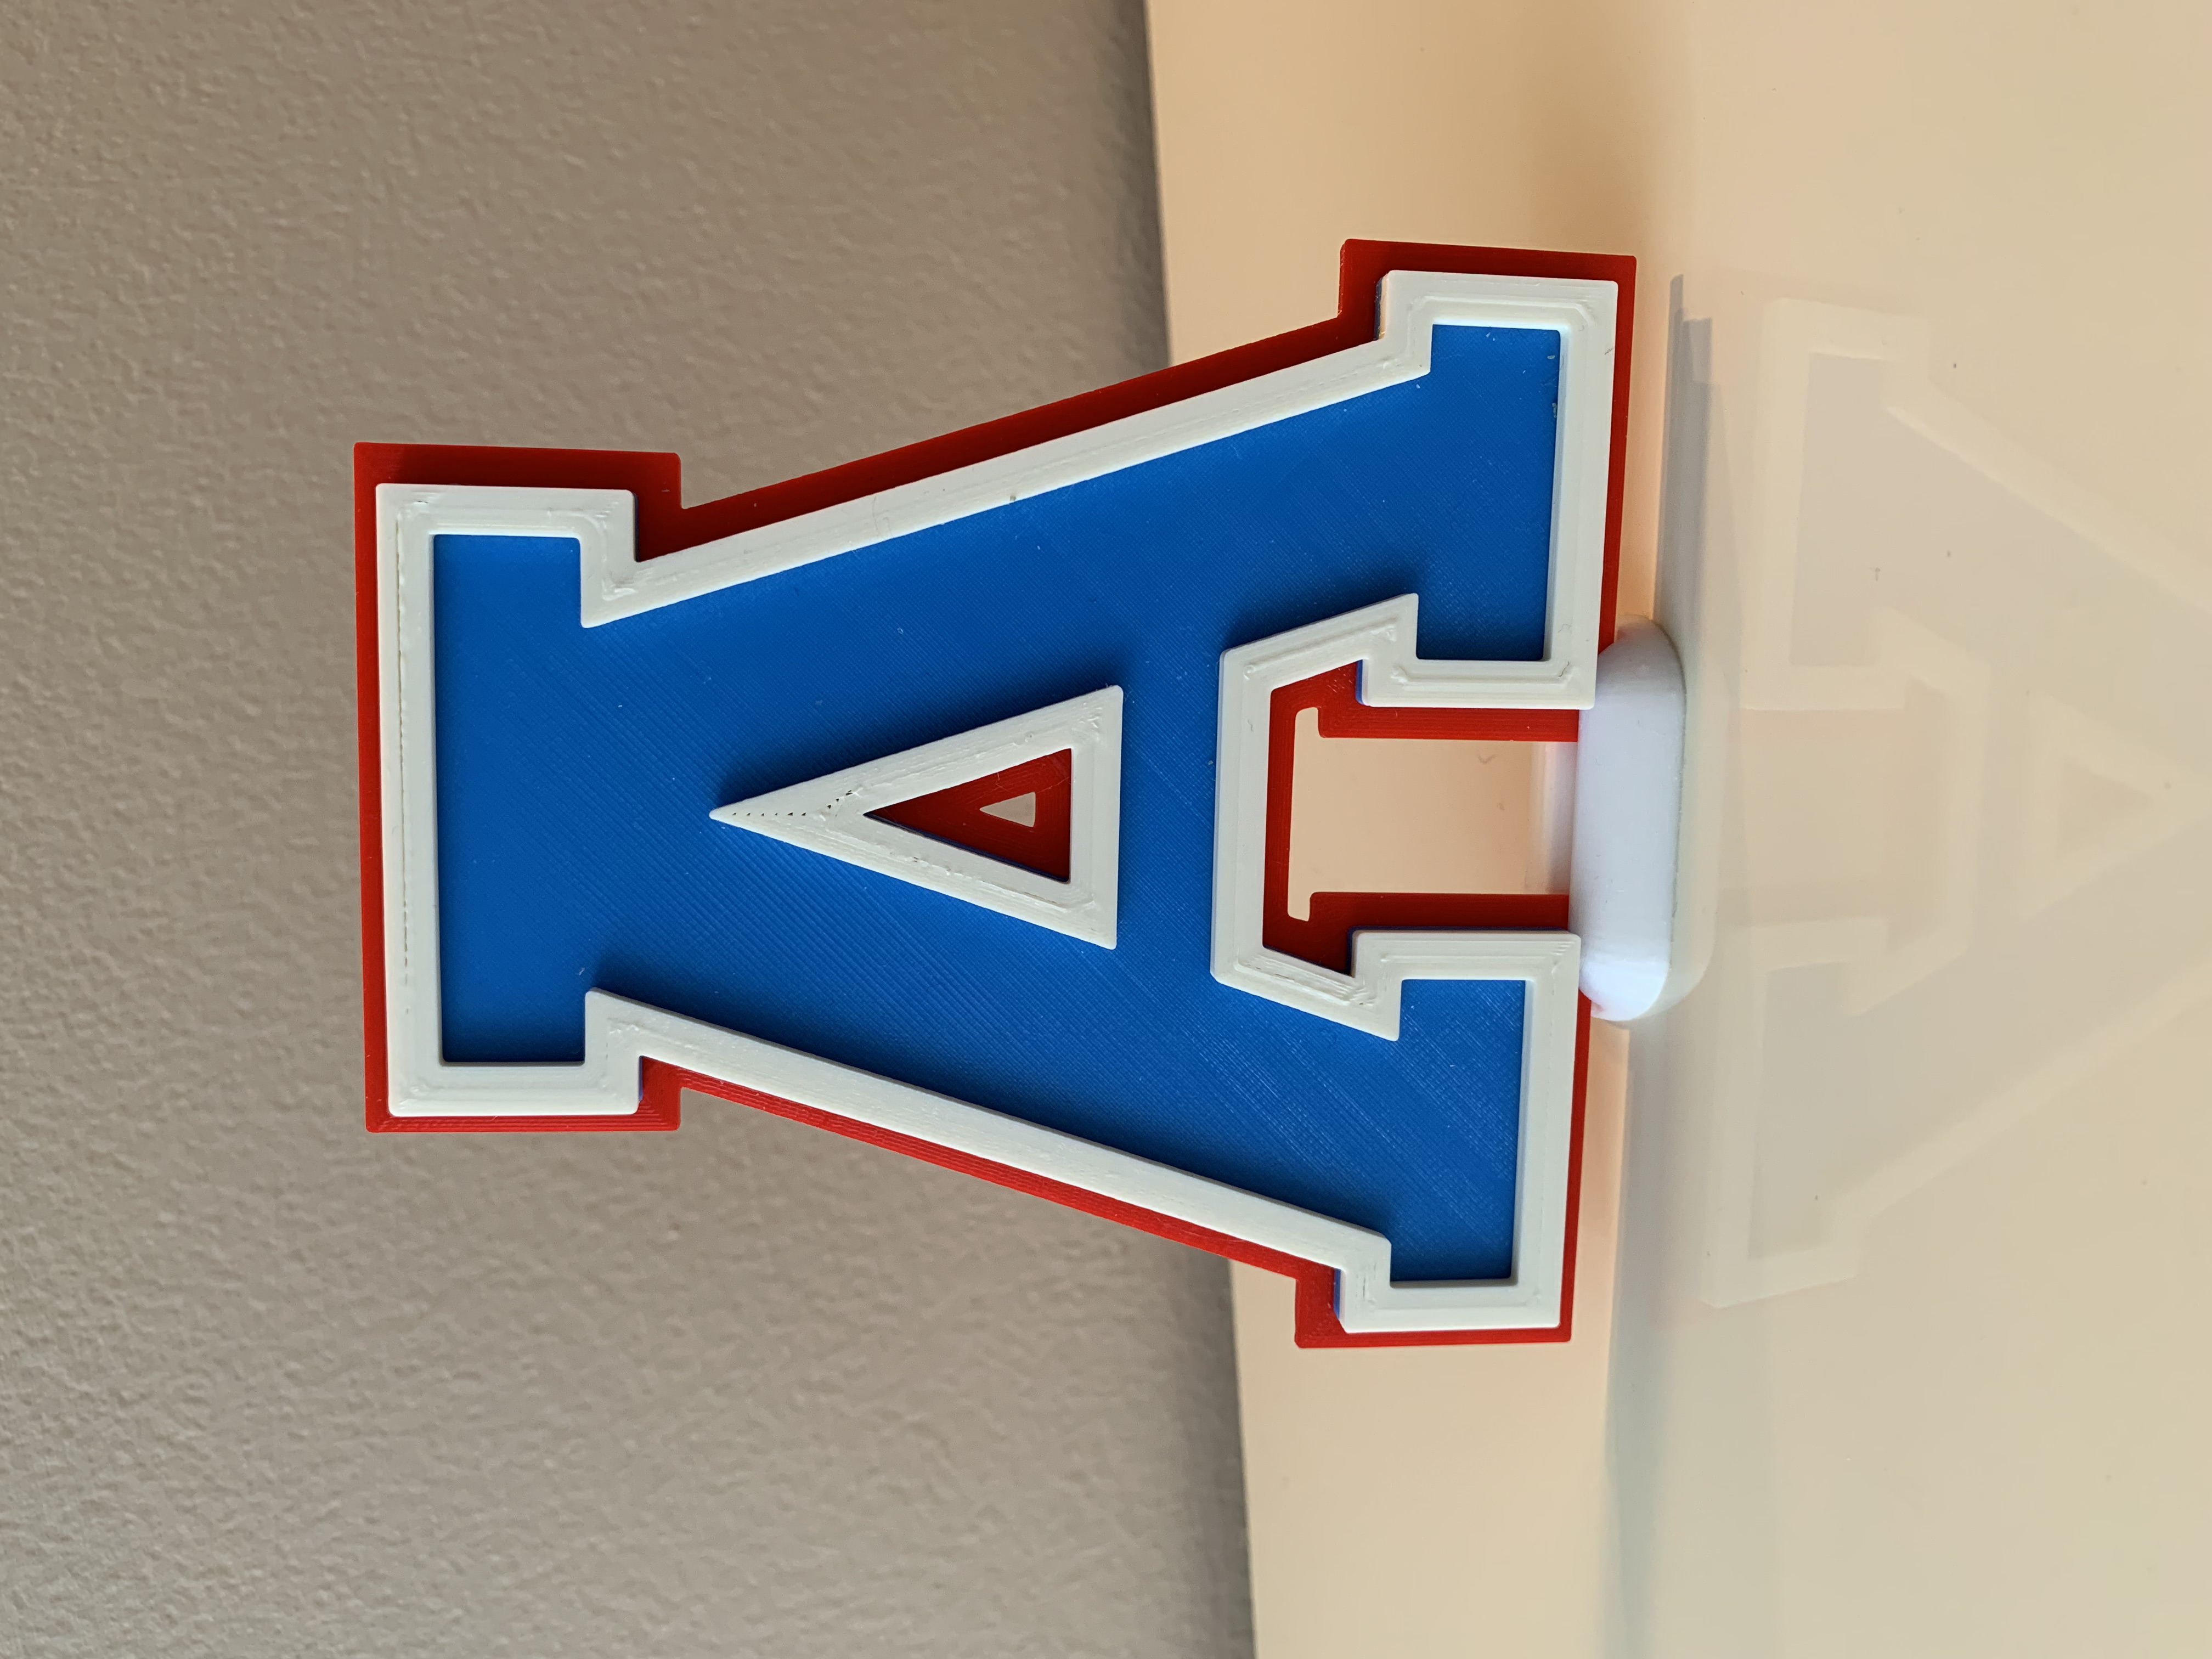 3D Lettering in Sports or School Colors